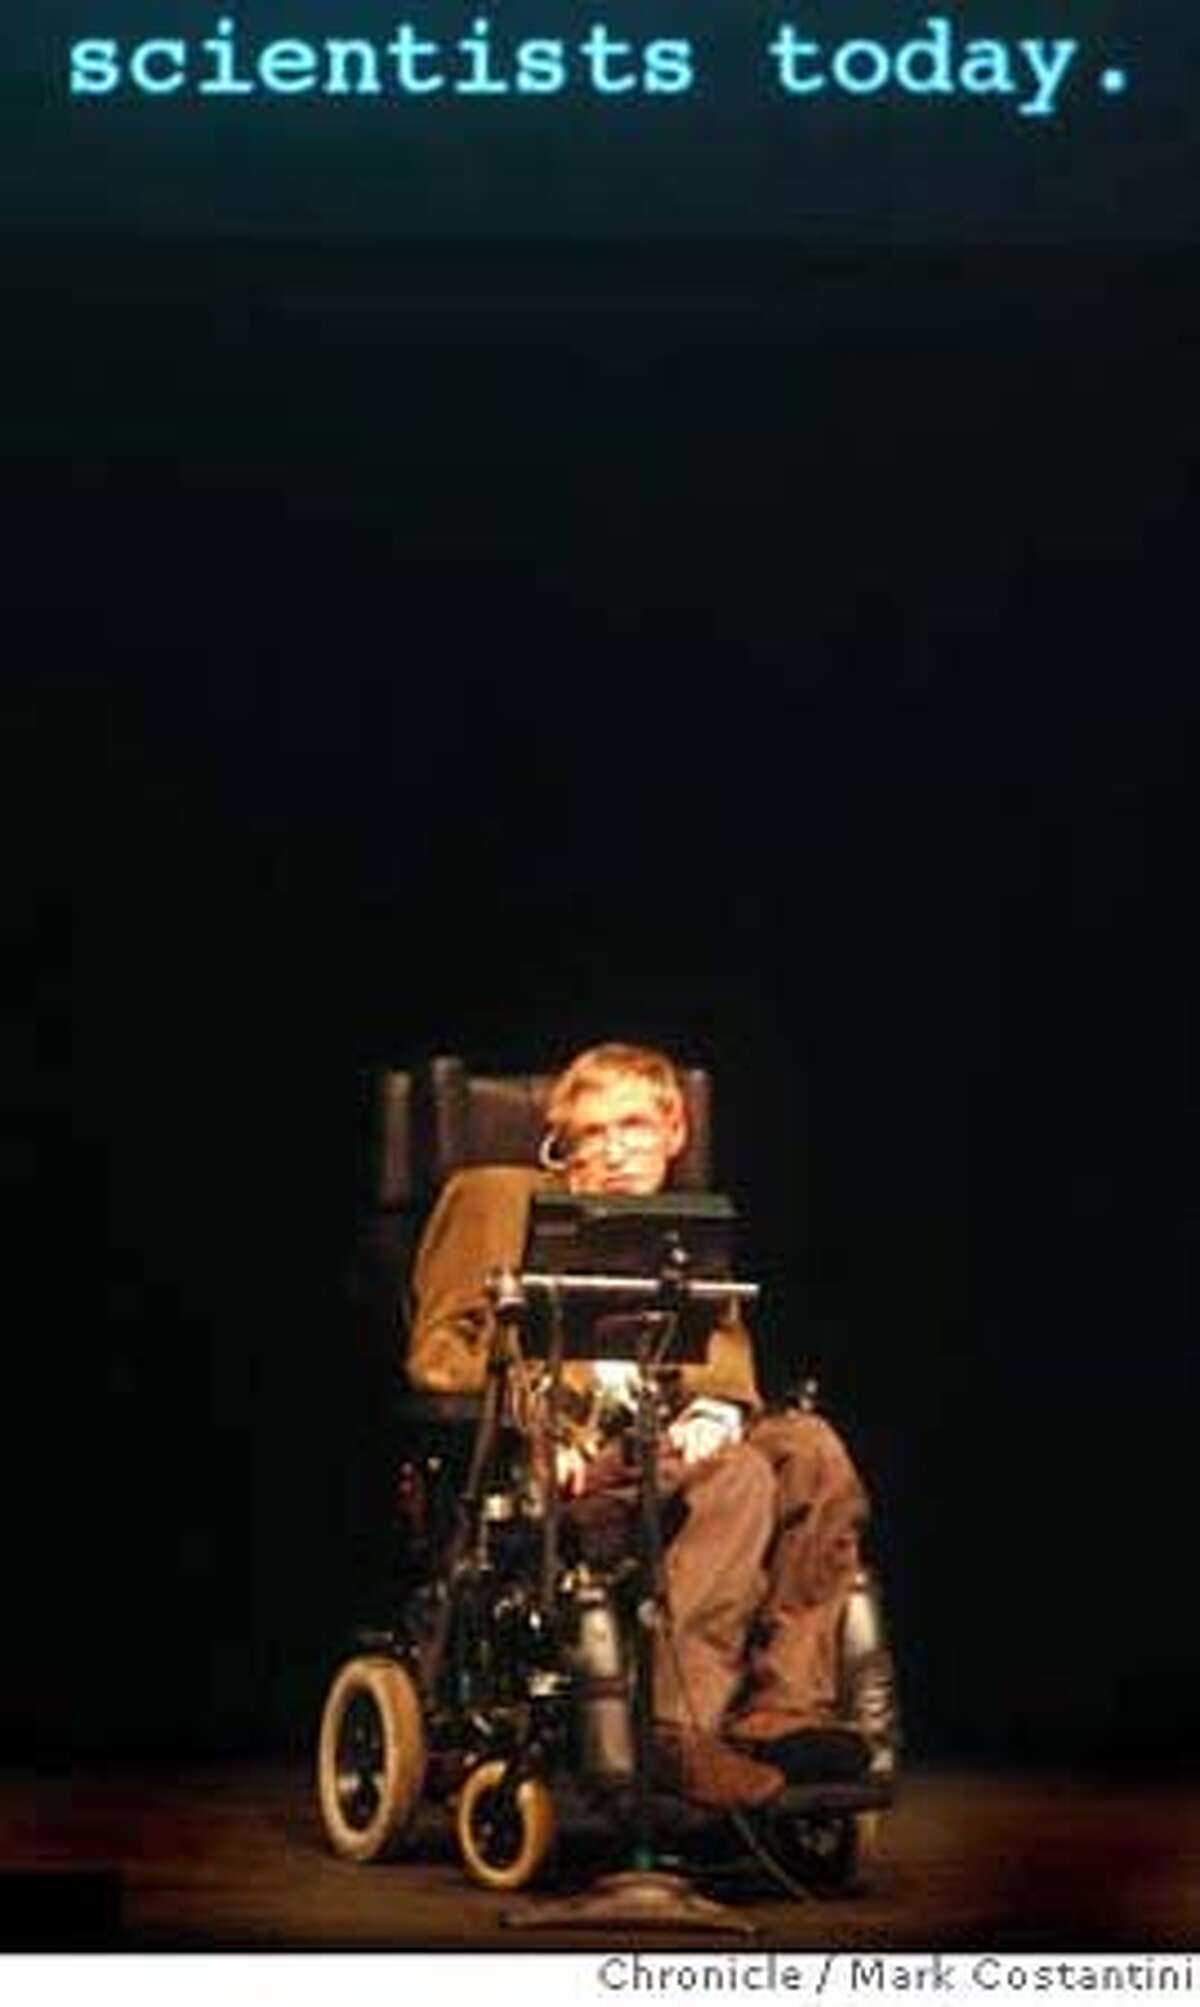 Physicist Stephen Hawking appears live in Berkeley. He addresses a sold-out crowd of 2k at Zellerbach Hall for the annual Oppenheimer Lecture in Physics. A second venue, Wheeler Hall, has sold out 700 seats for a simulcast. photo taken on 3/13/07 ( Mark Costantini / The Chronicle ) Stephen Hawking (cq)